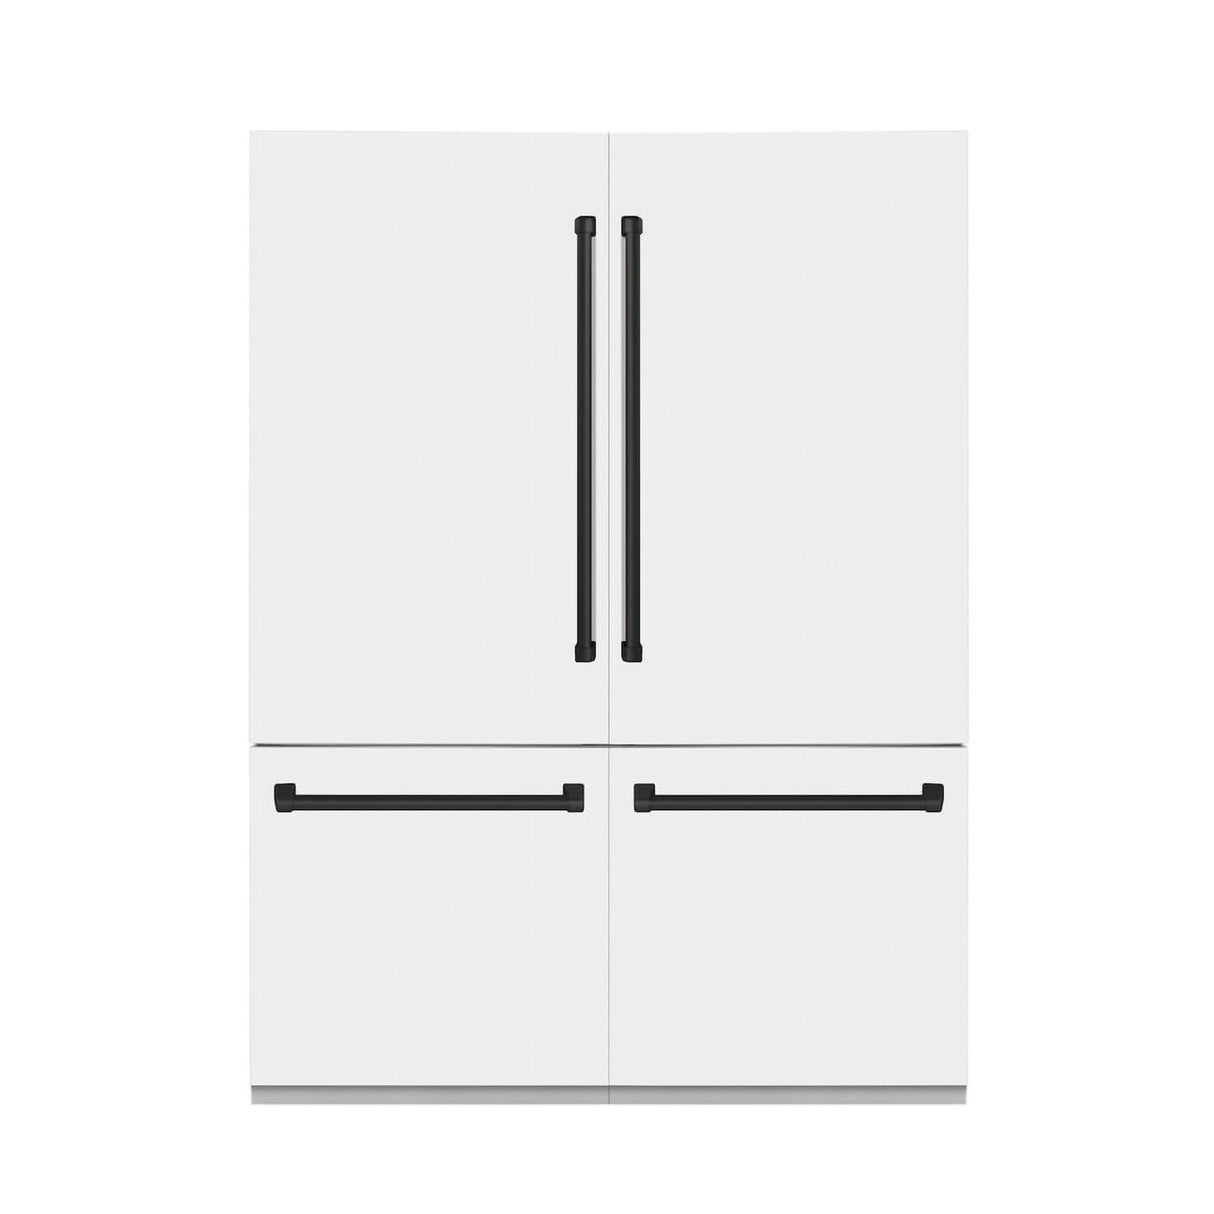 ZLINE Autograph Edition 60 in. 32.2 cu. ft. Built-in 4-Door French Door Refrigerator with Internal Water and Ice Dispenser in White Matte with Matte Black Accents (RBIVZ-WM-60-MB)